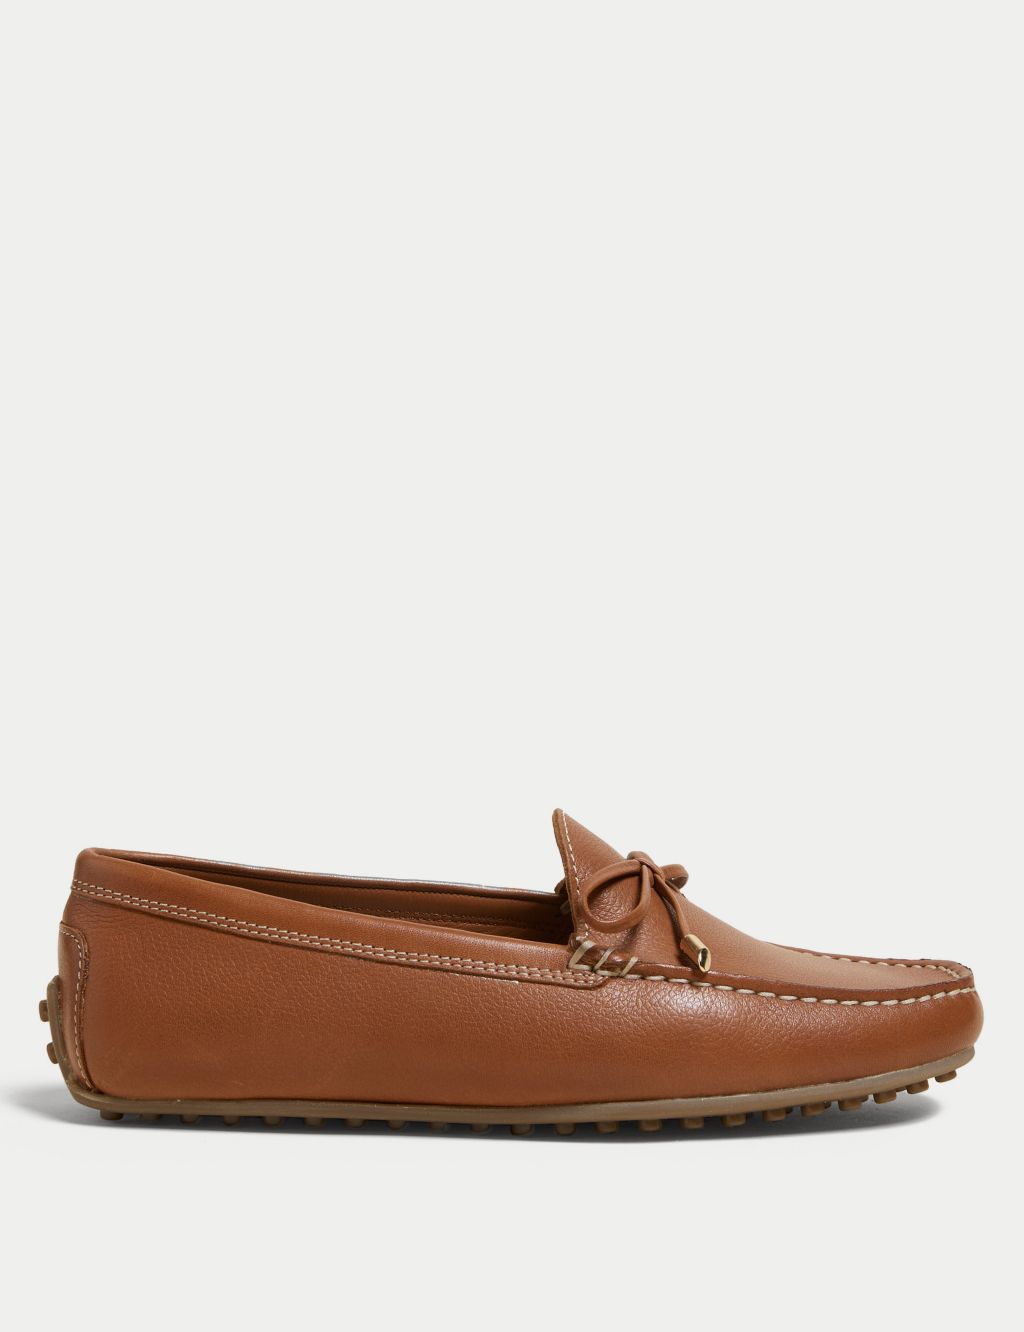 Wide Fit Leather Bow Boat Shoes image 1